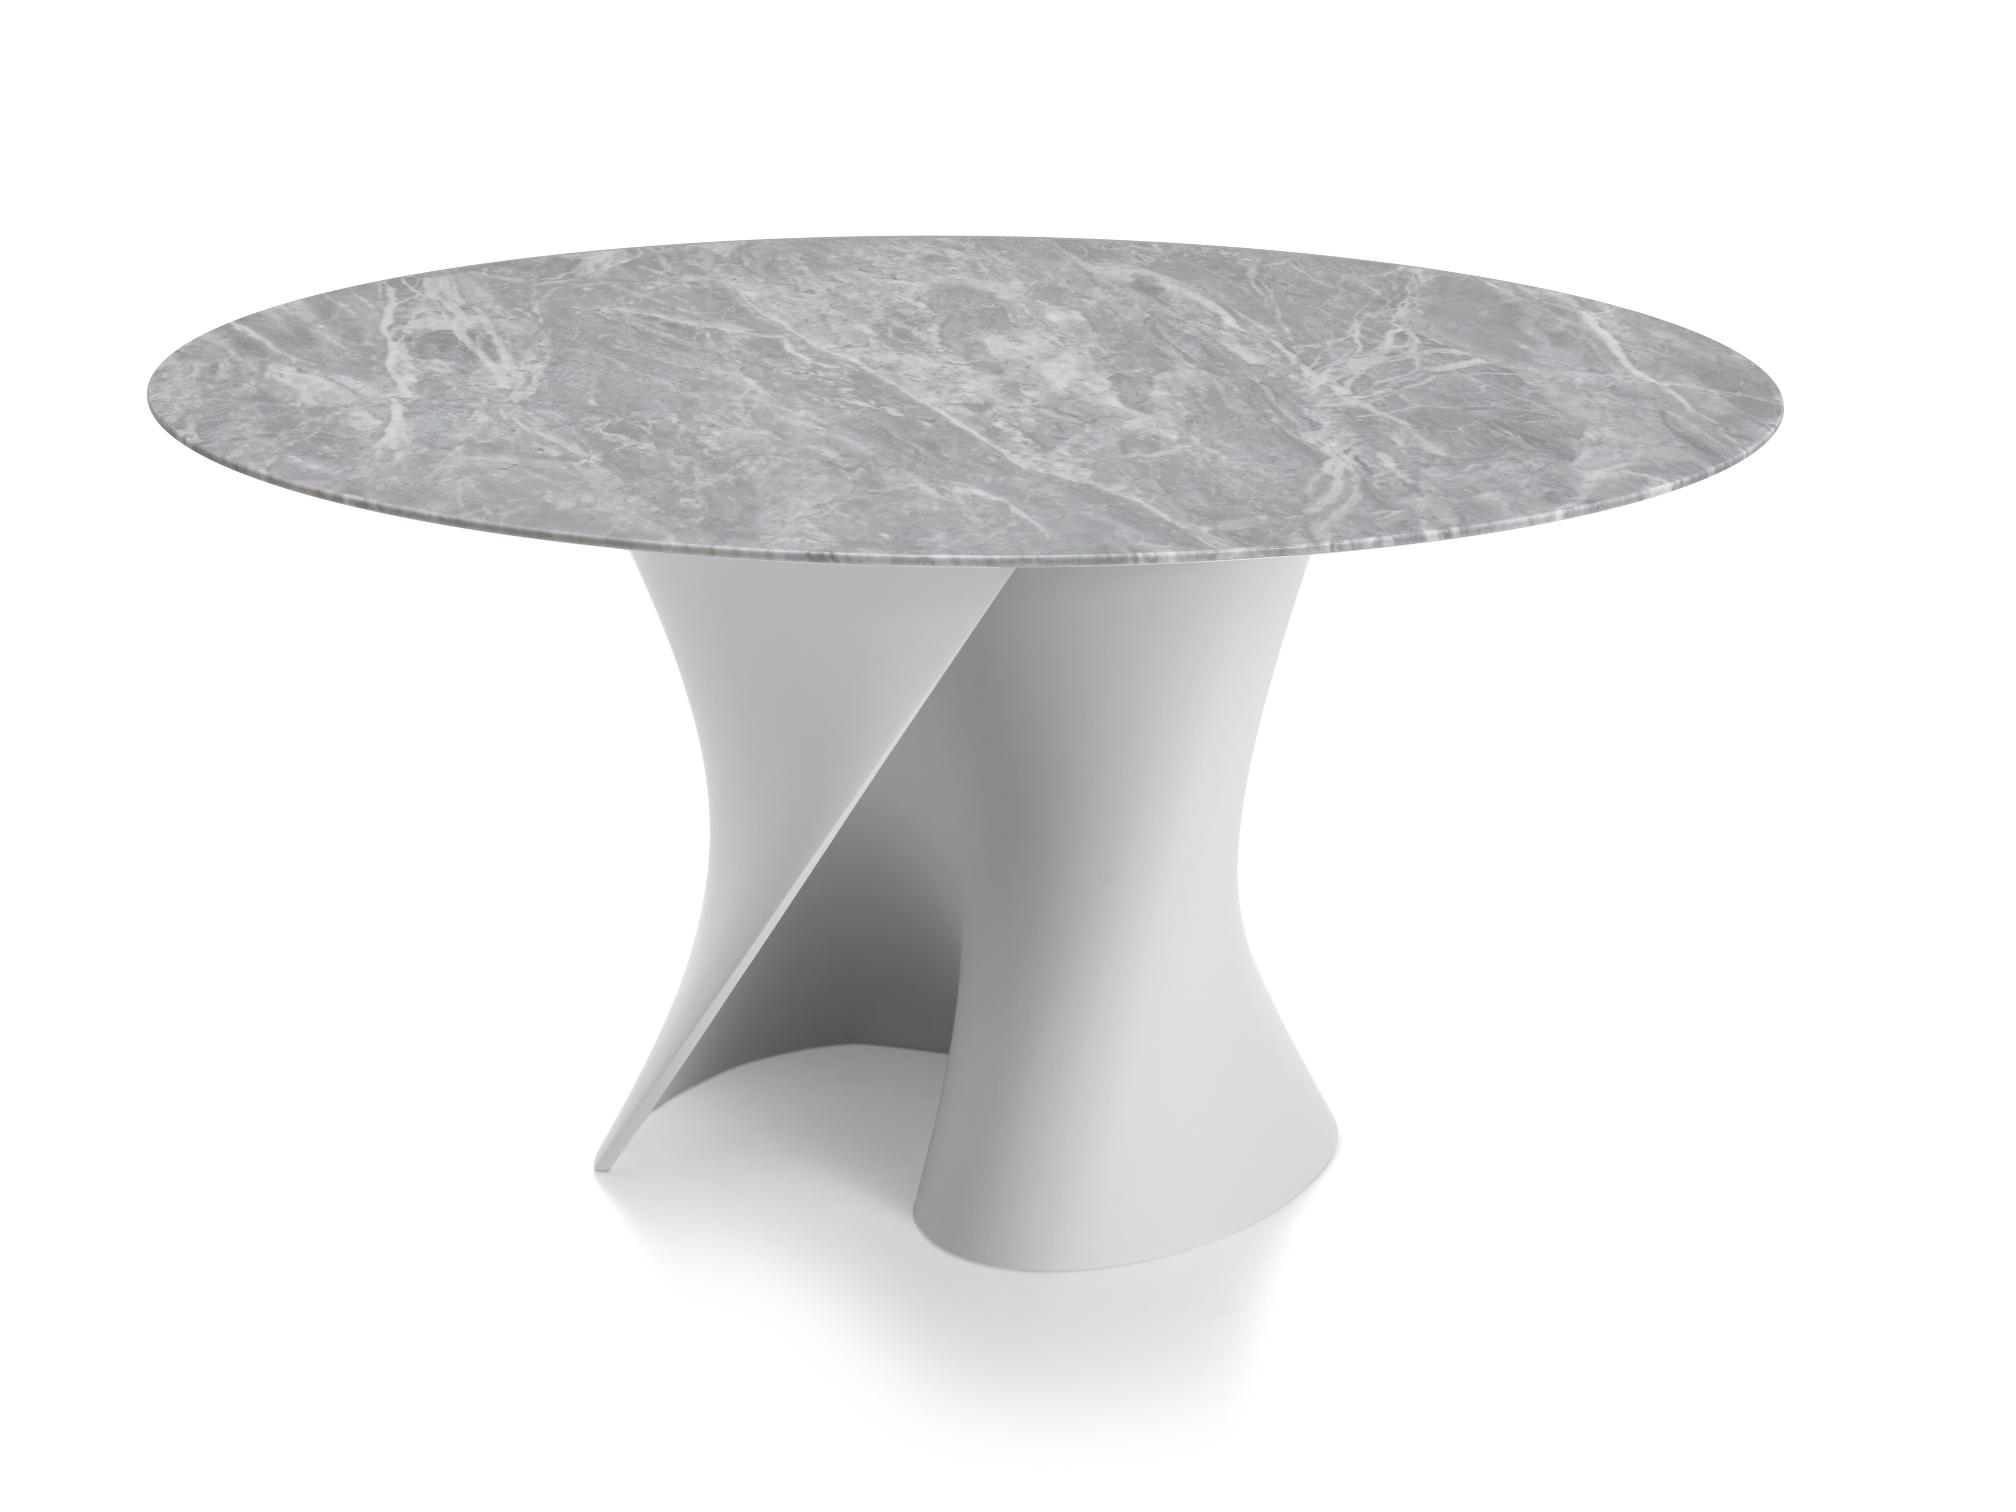 S Table with Elegant Grey Marble Top ☞ Dimensions: Ø 140 cm